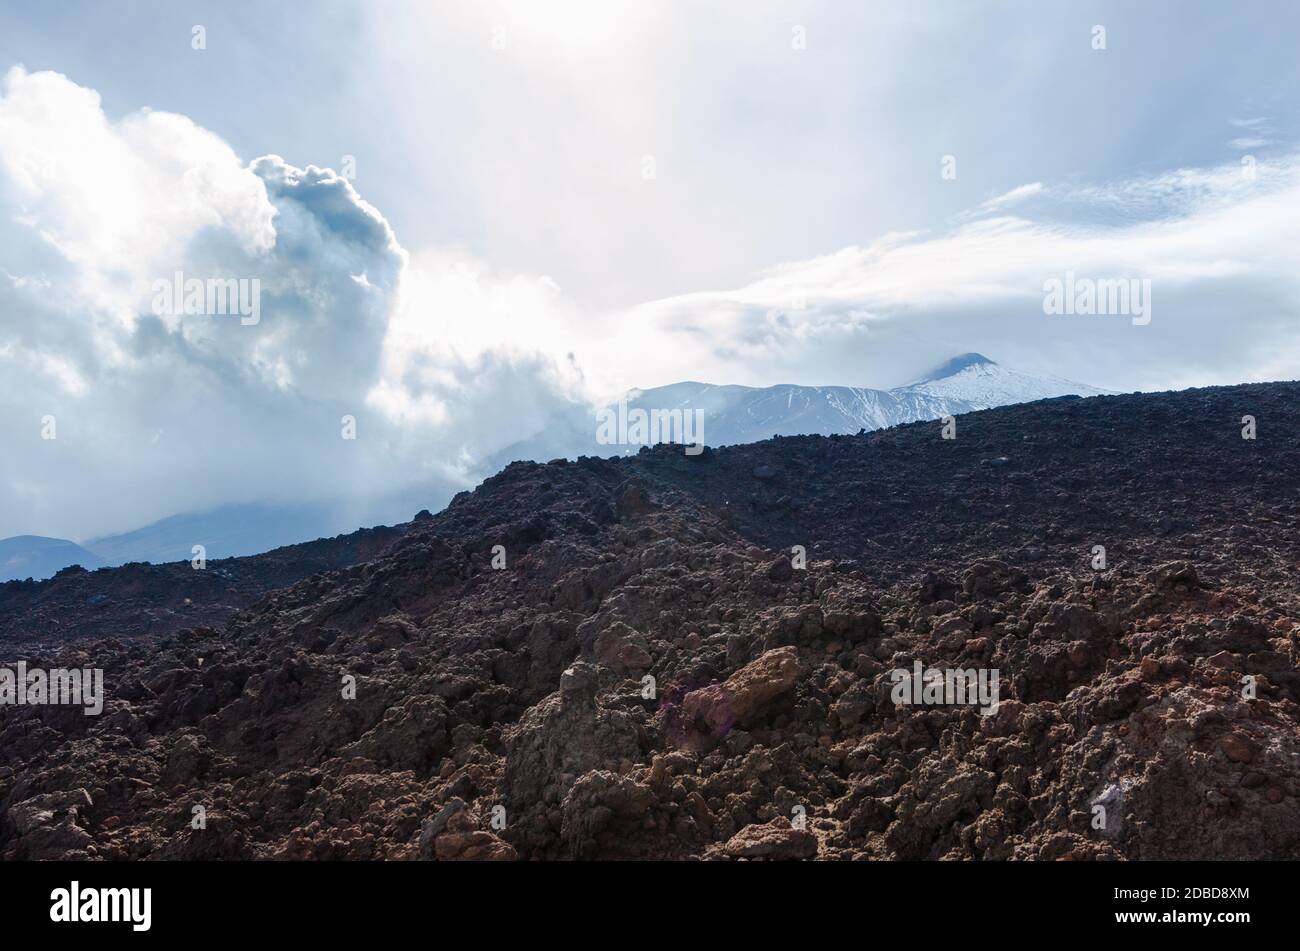 Clouds og volcanic smoke passing over Mount Etna slopes and hills in Sicily, Italy. Stock Photo